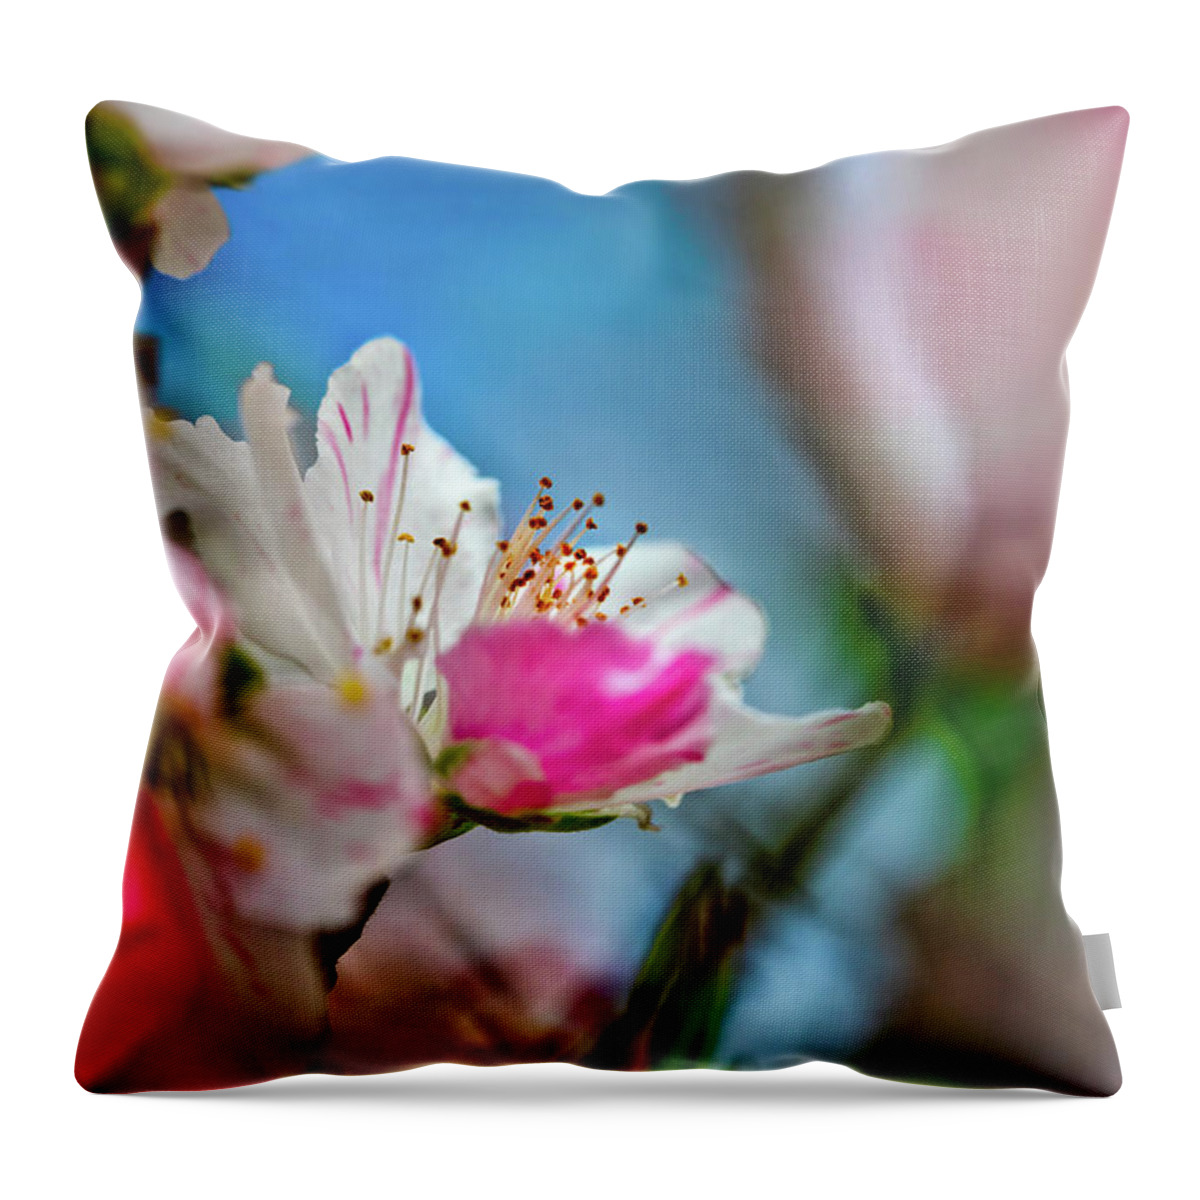 Tropical Dreams Throw Pillow featuring the photograph Passions of Spring by Az Jackson